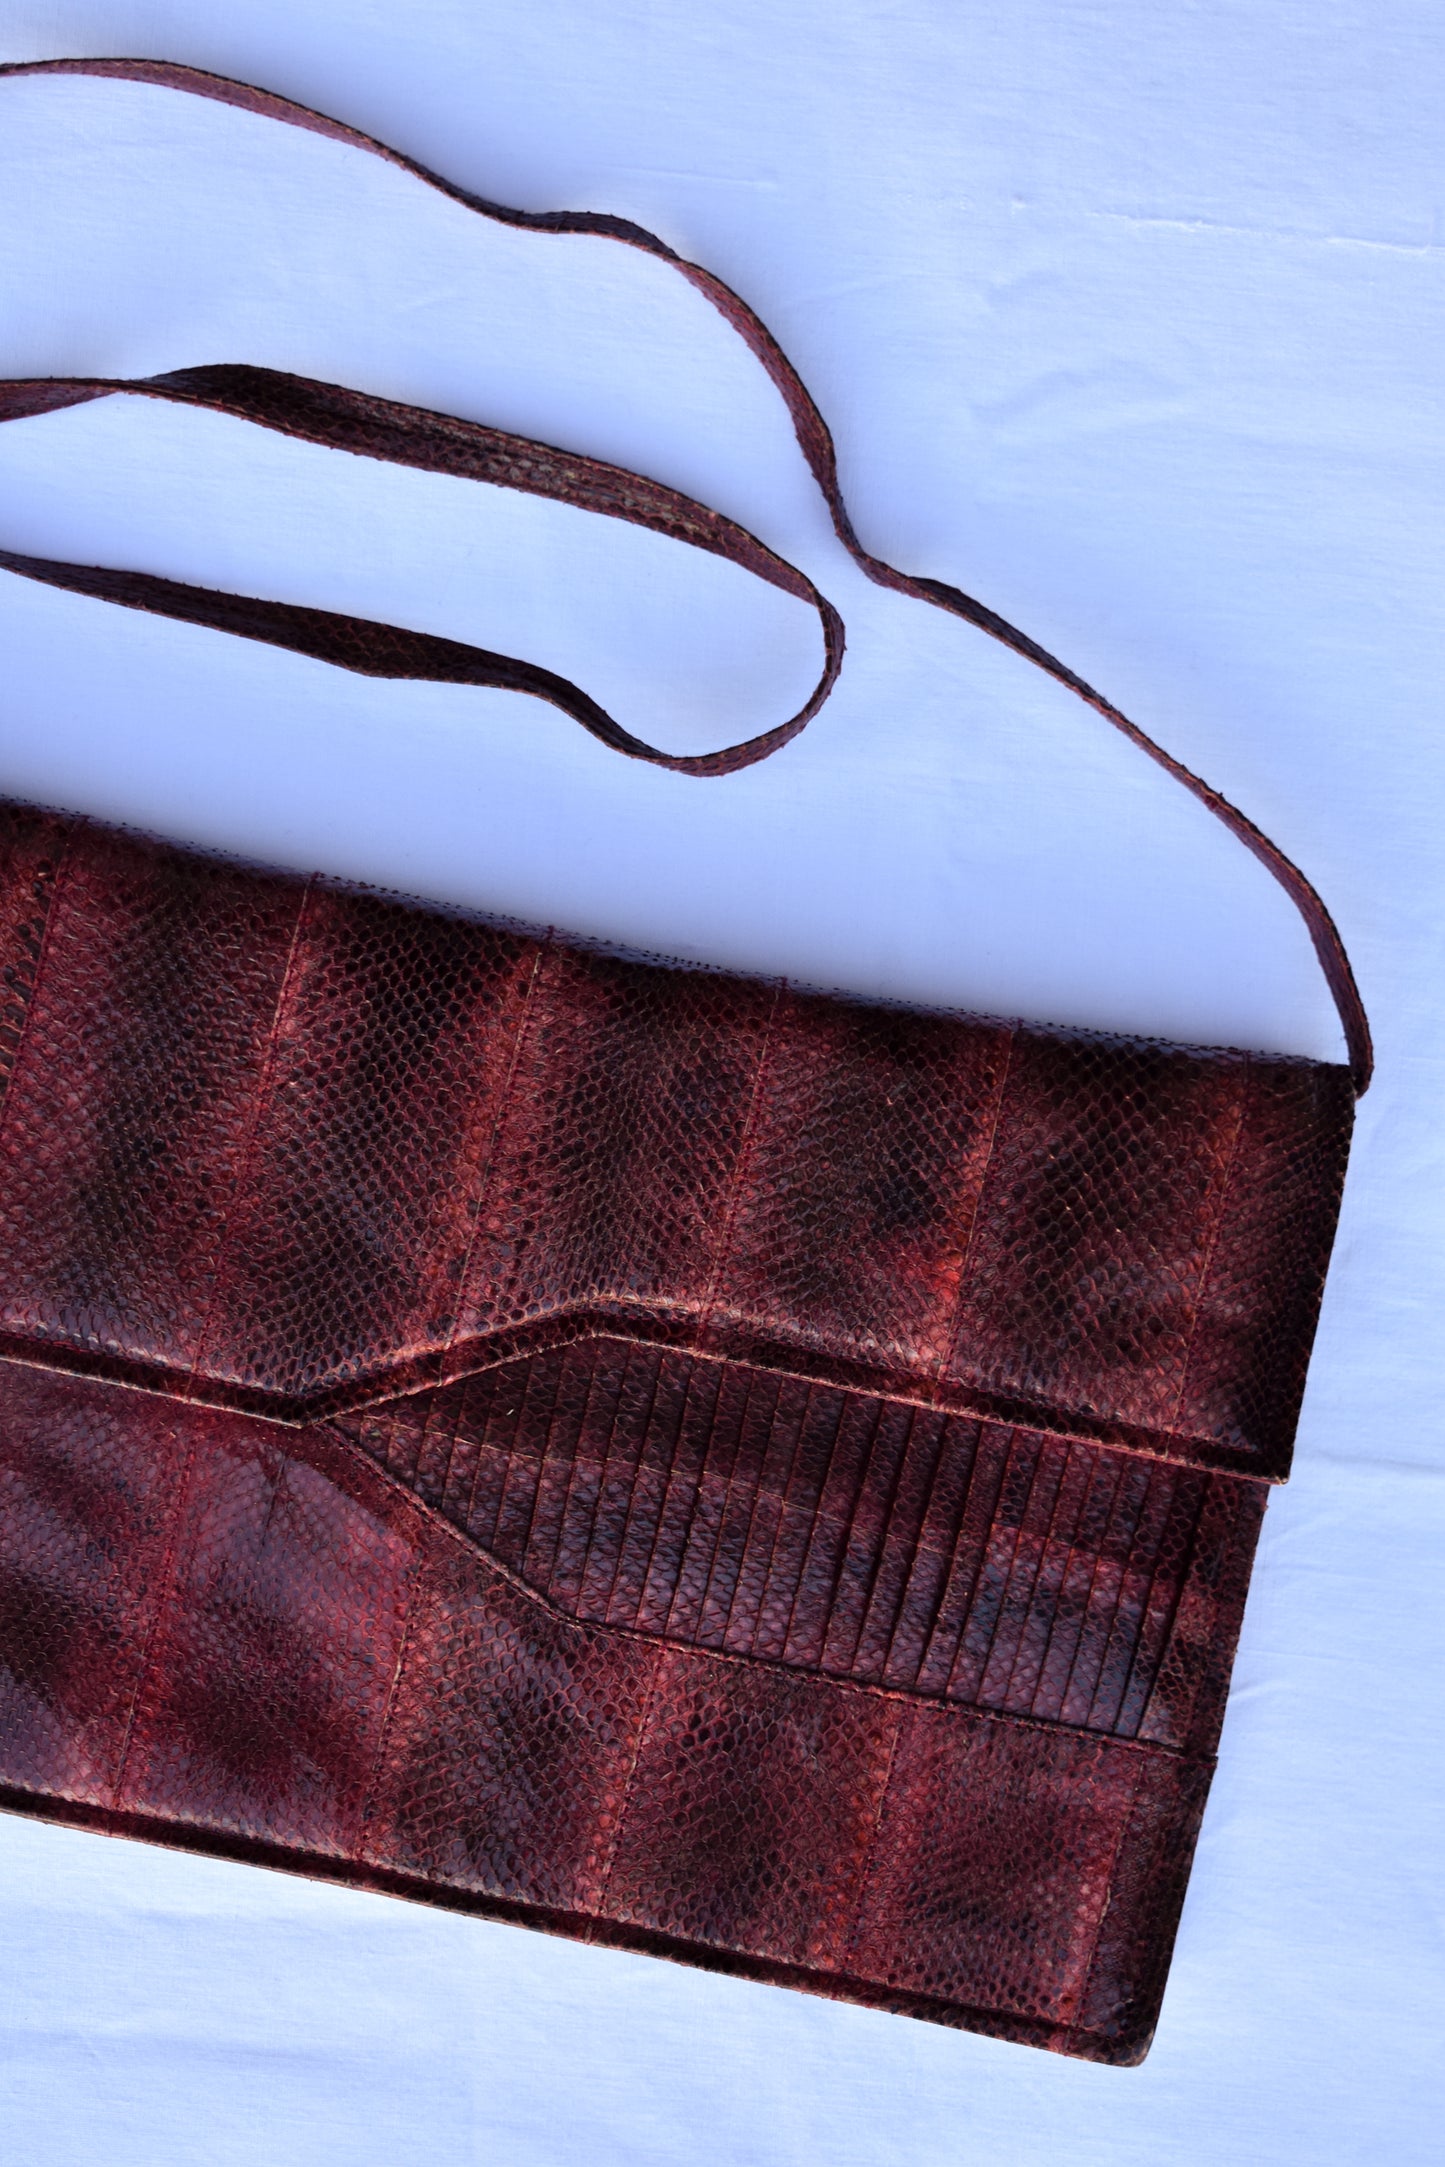 Maroon snakeskin clutch with strap